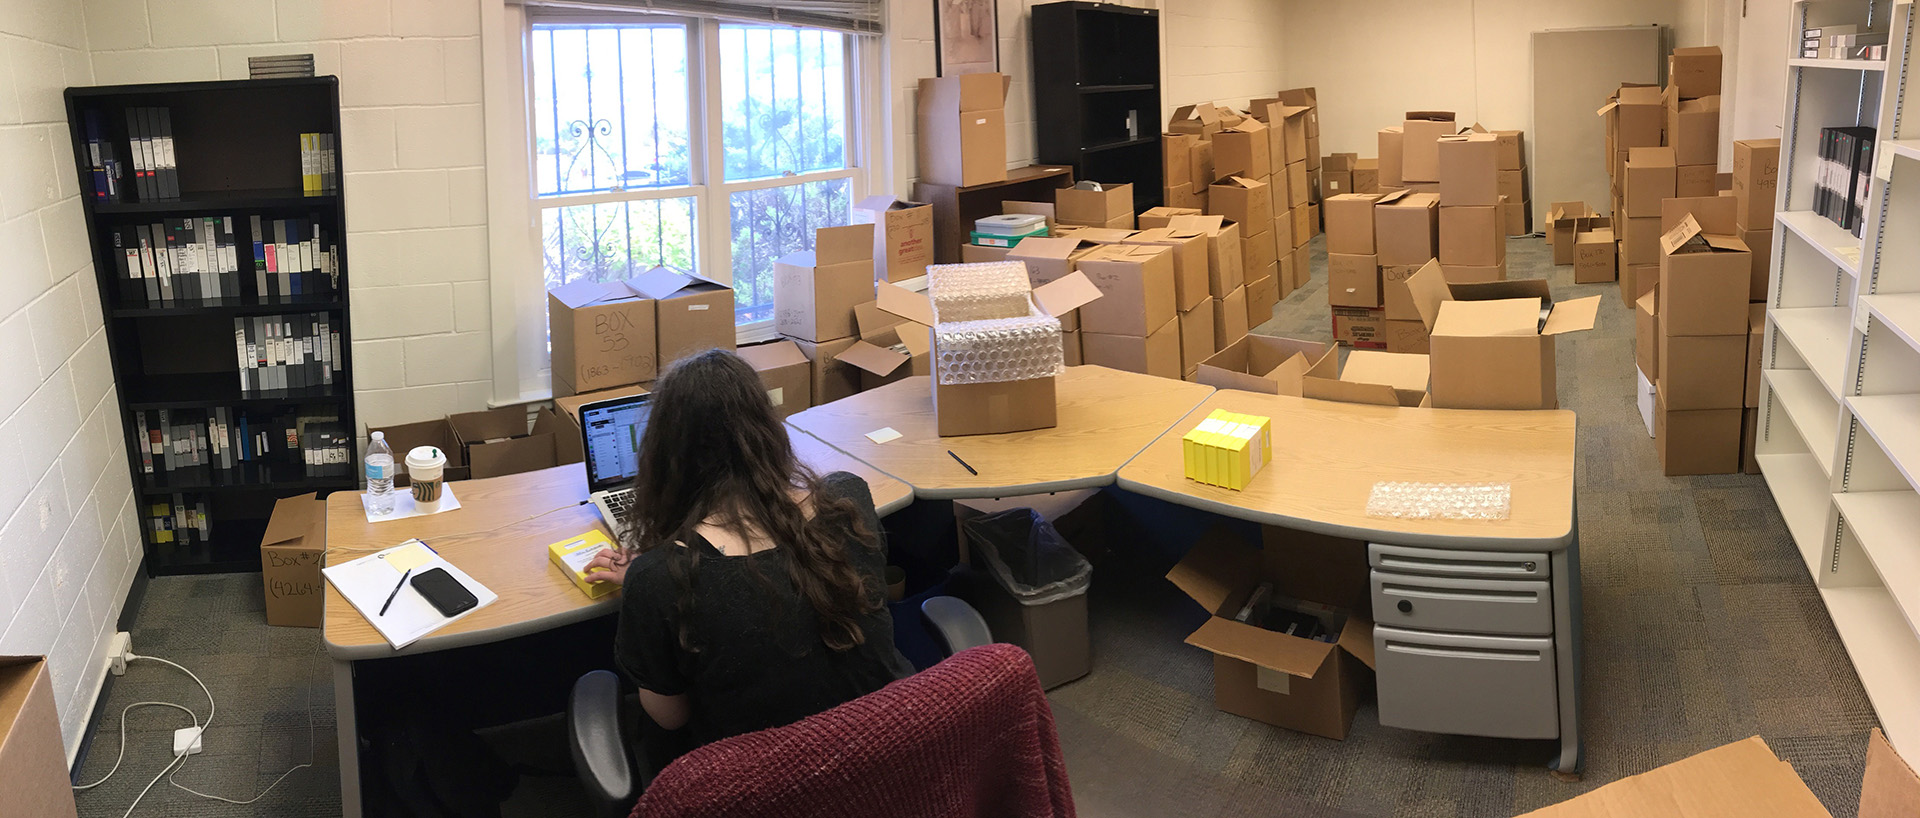 Archivist Megan Rose works at a desk to process boxes of media.